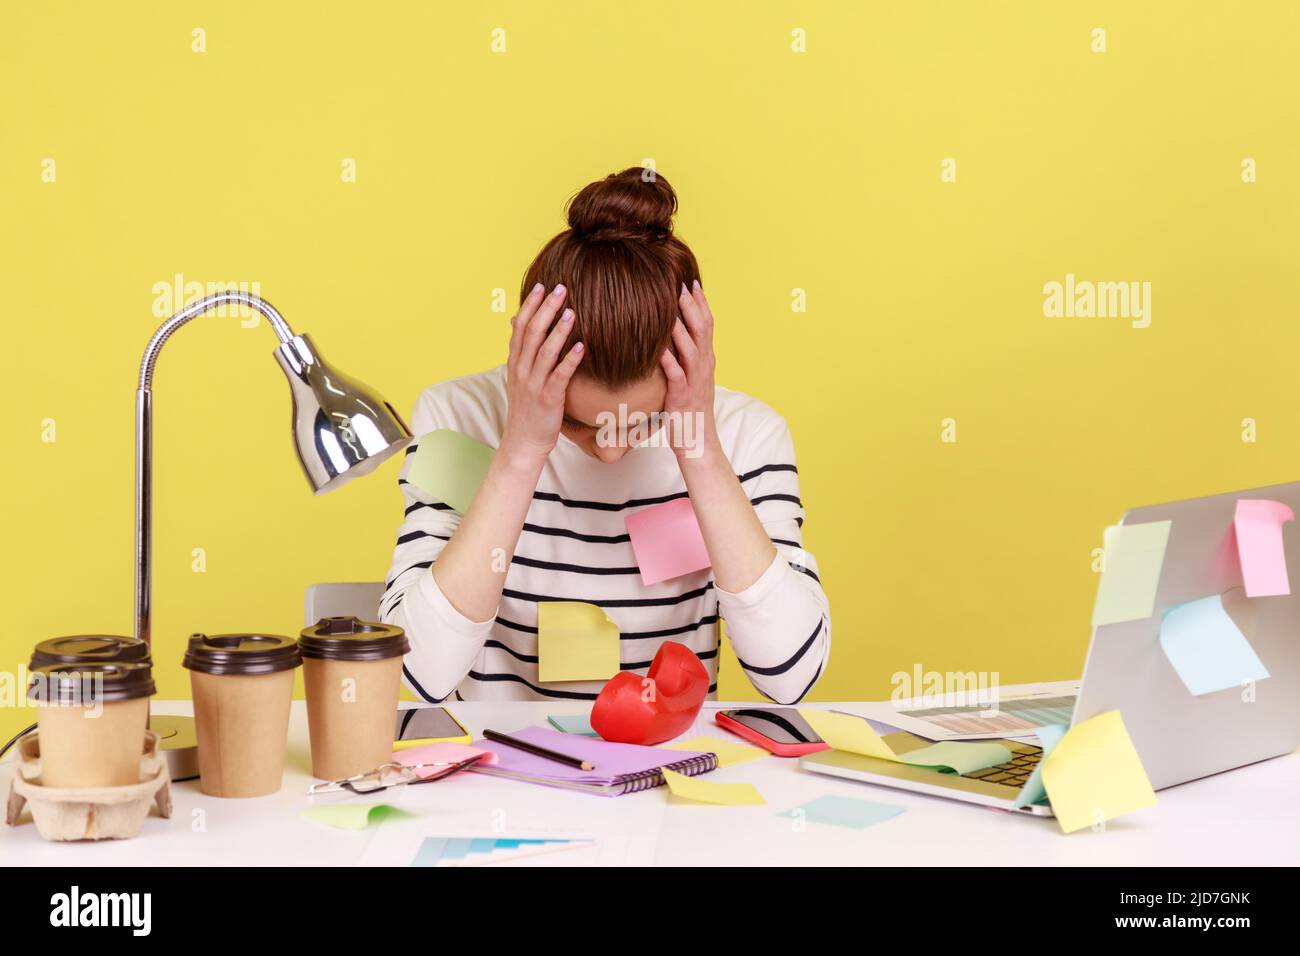 Tired exhausted overworked woman office worker covered with sticky notes, clasping head, thinking desperate, suffering headache. Indoor studio studio shot isolated on yellow background. Stock Photo